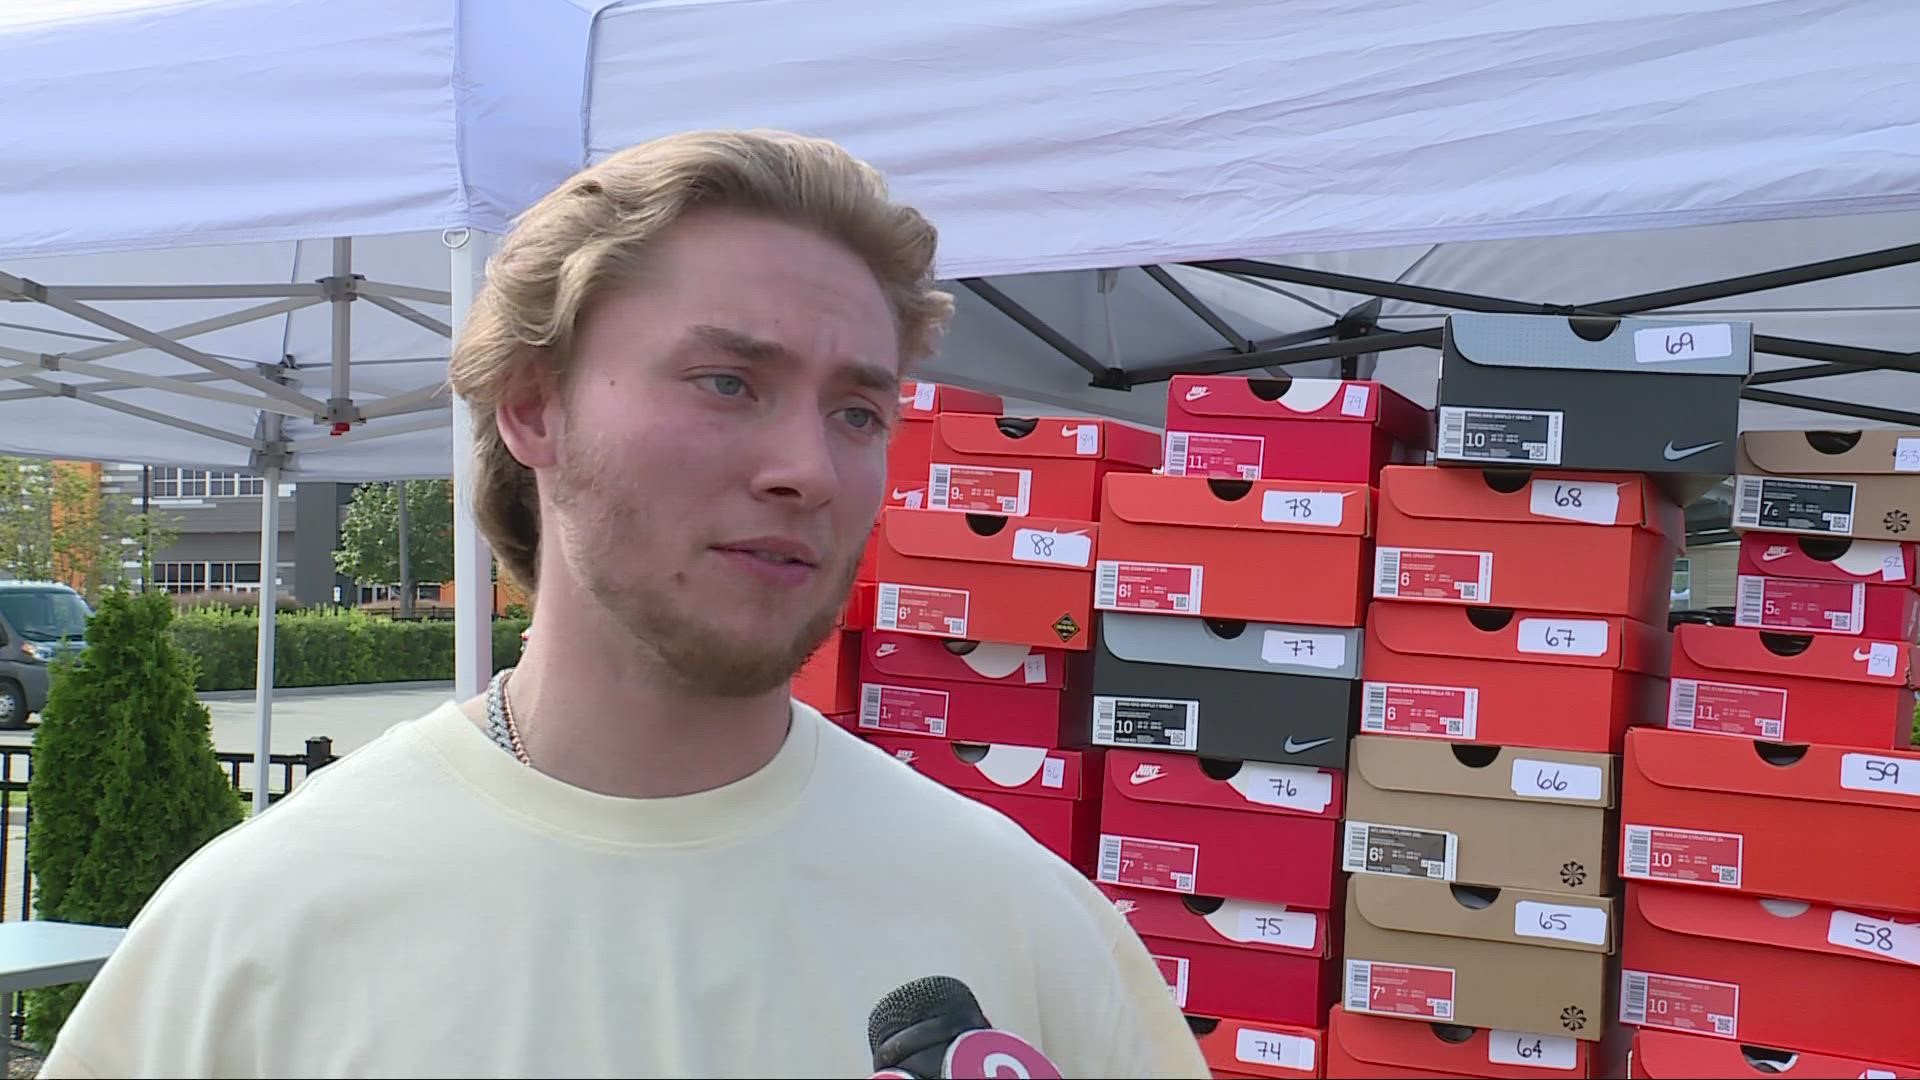 440 Kicks owner Hayden Speeth handed out over 100 pairs of shoes to kids in need in Cleveland.